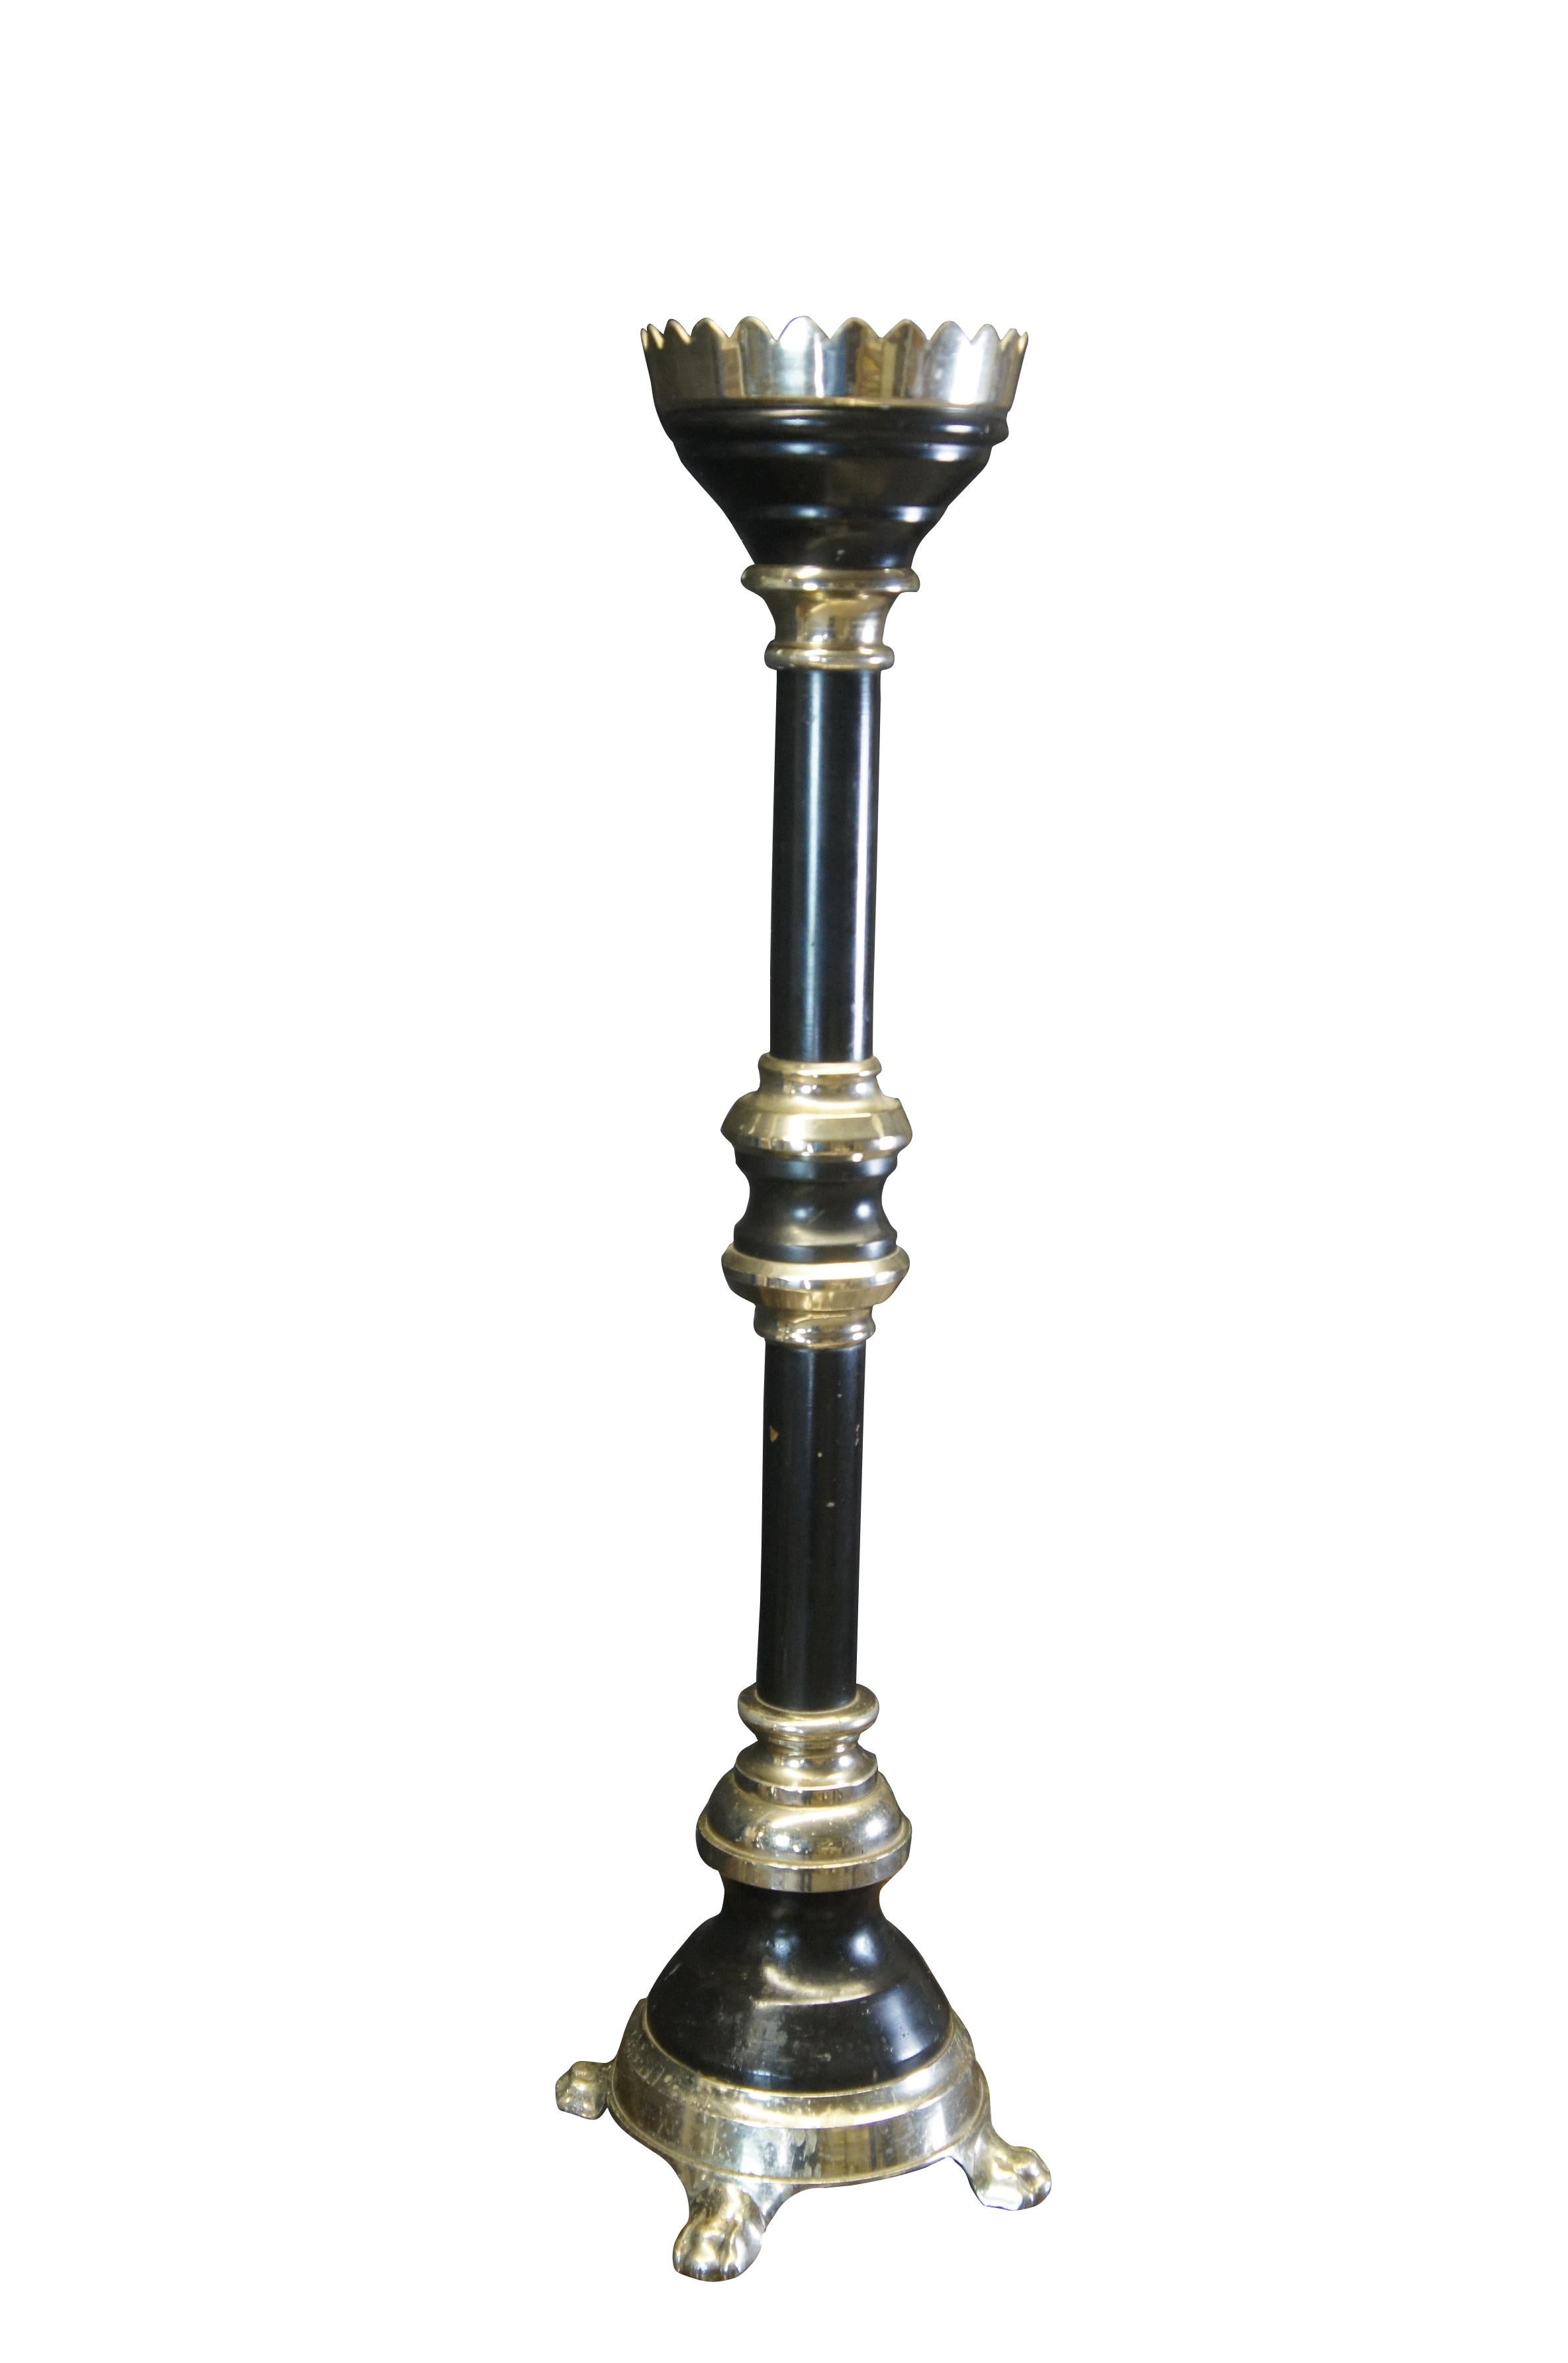 Genuine Art Deco Floor Candle or Altar Sticks, circa 1920s.  Made from nickel and ebony wood.  

Dimensions:
8.5